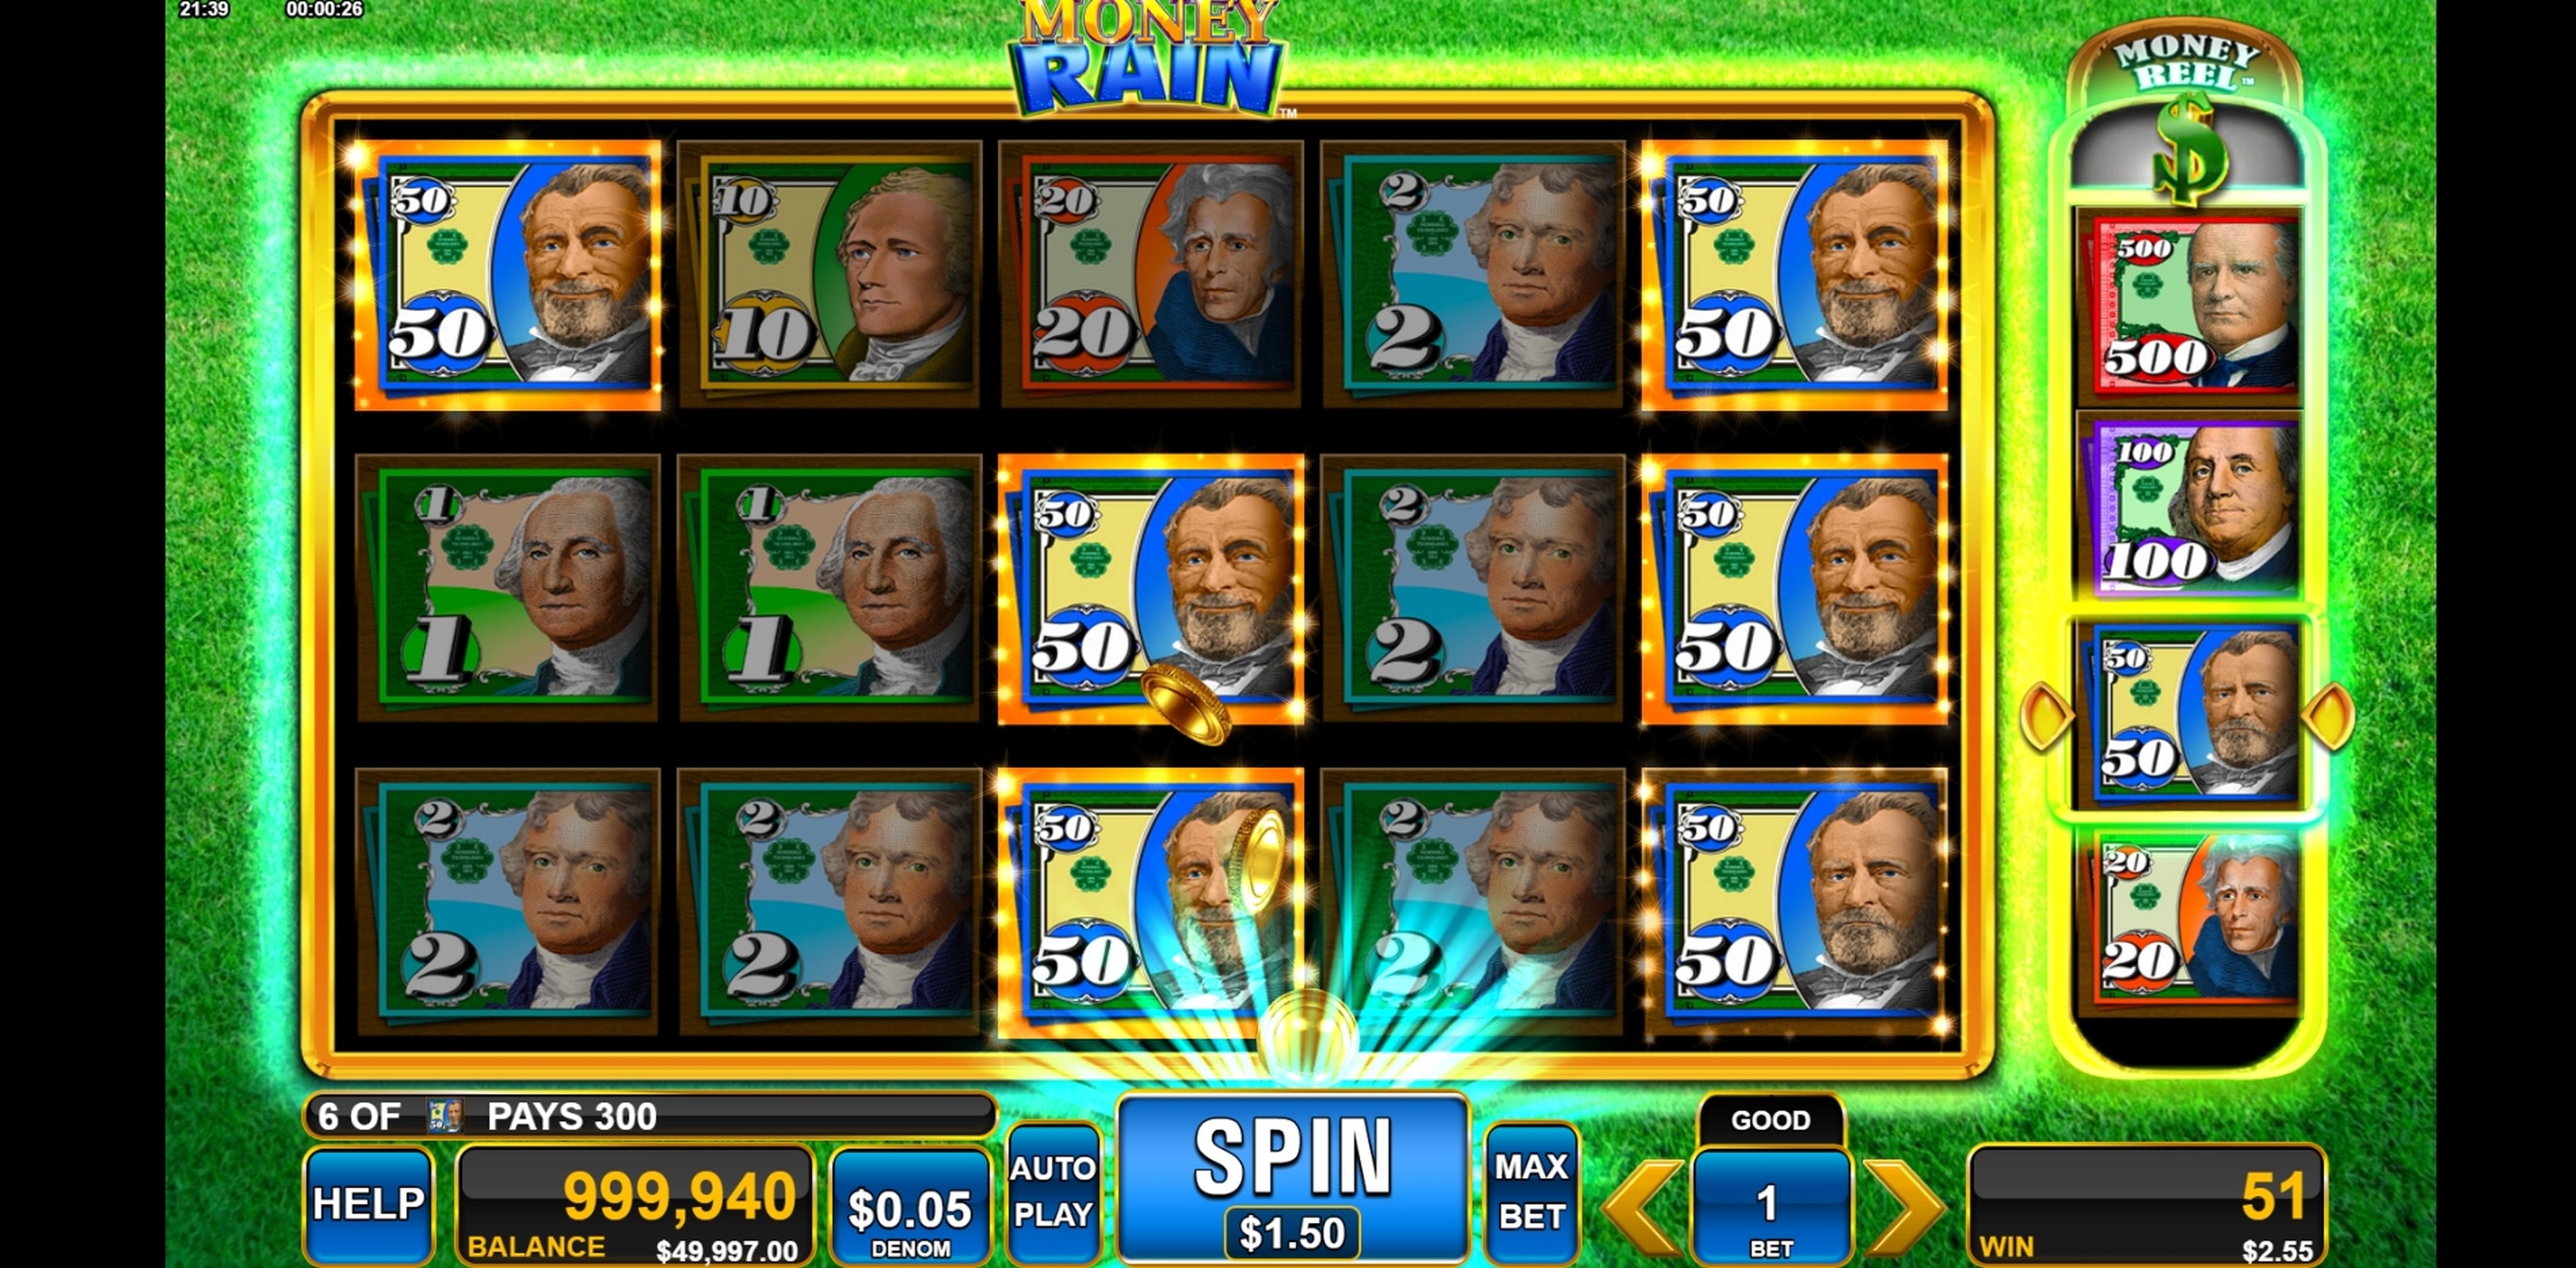 Win Money in Money Rain Free Slot Game by Incredible Technologies